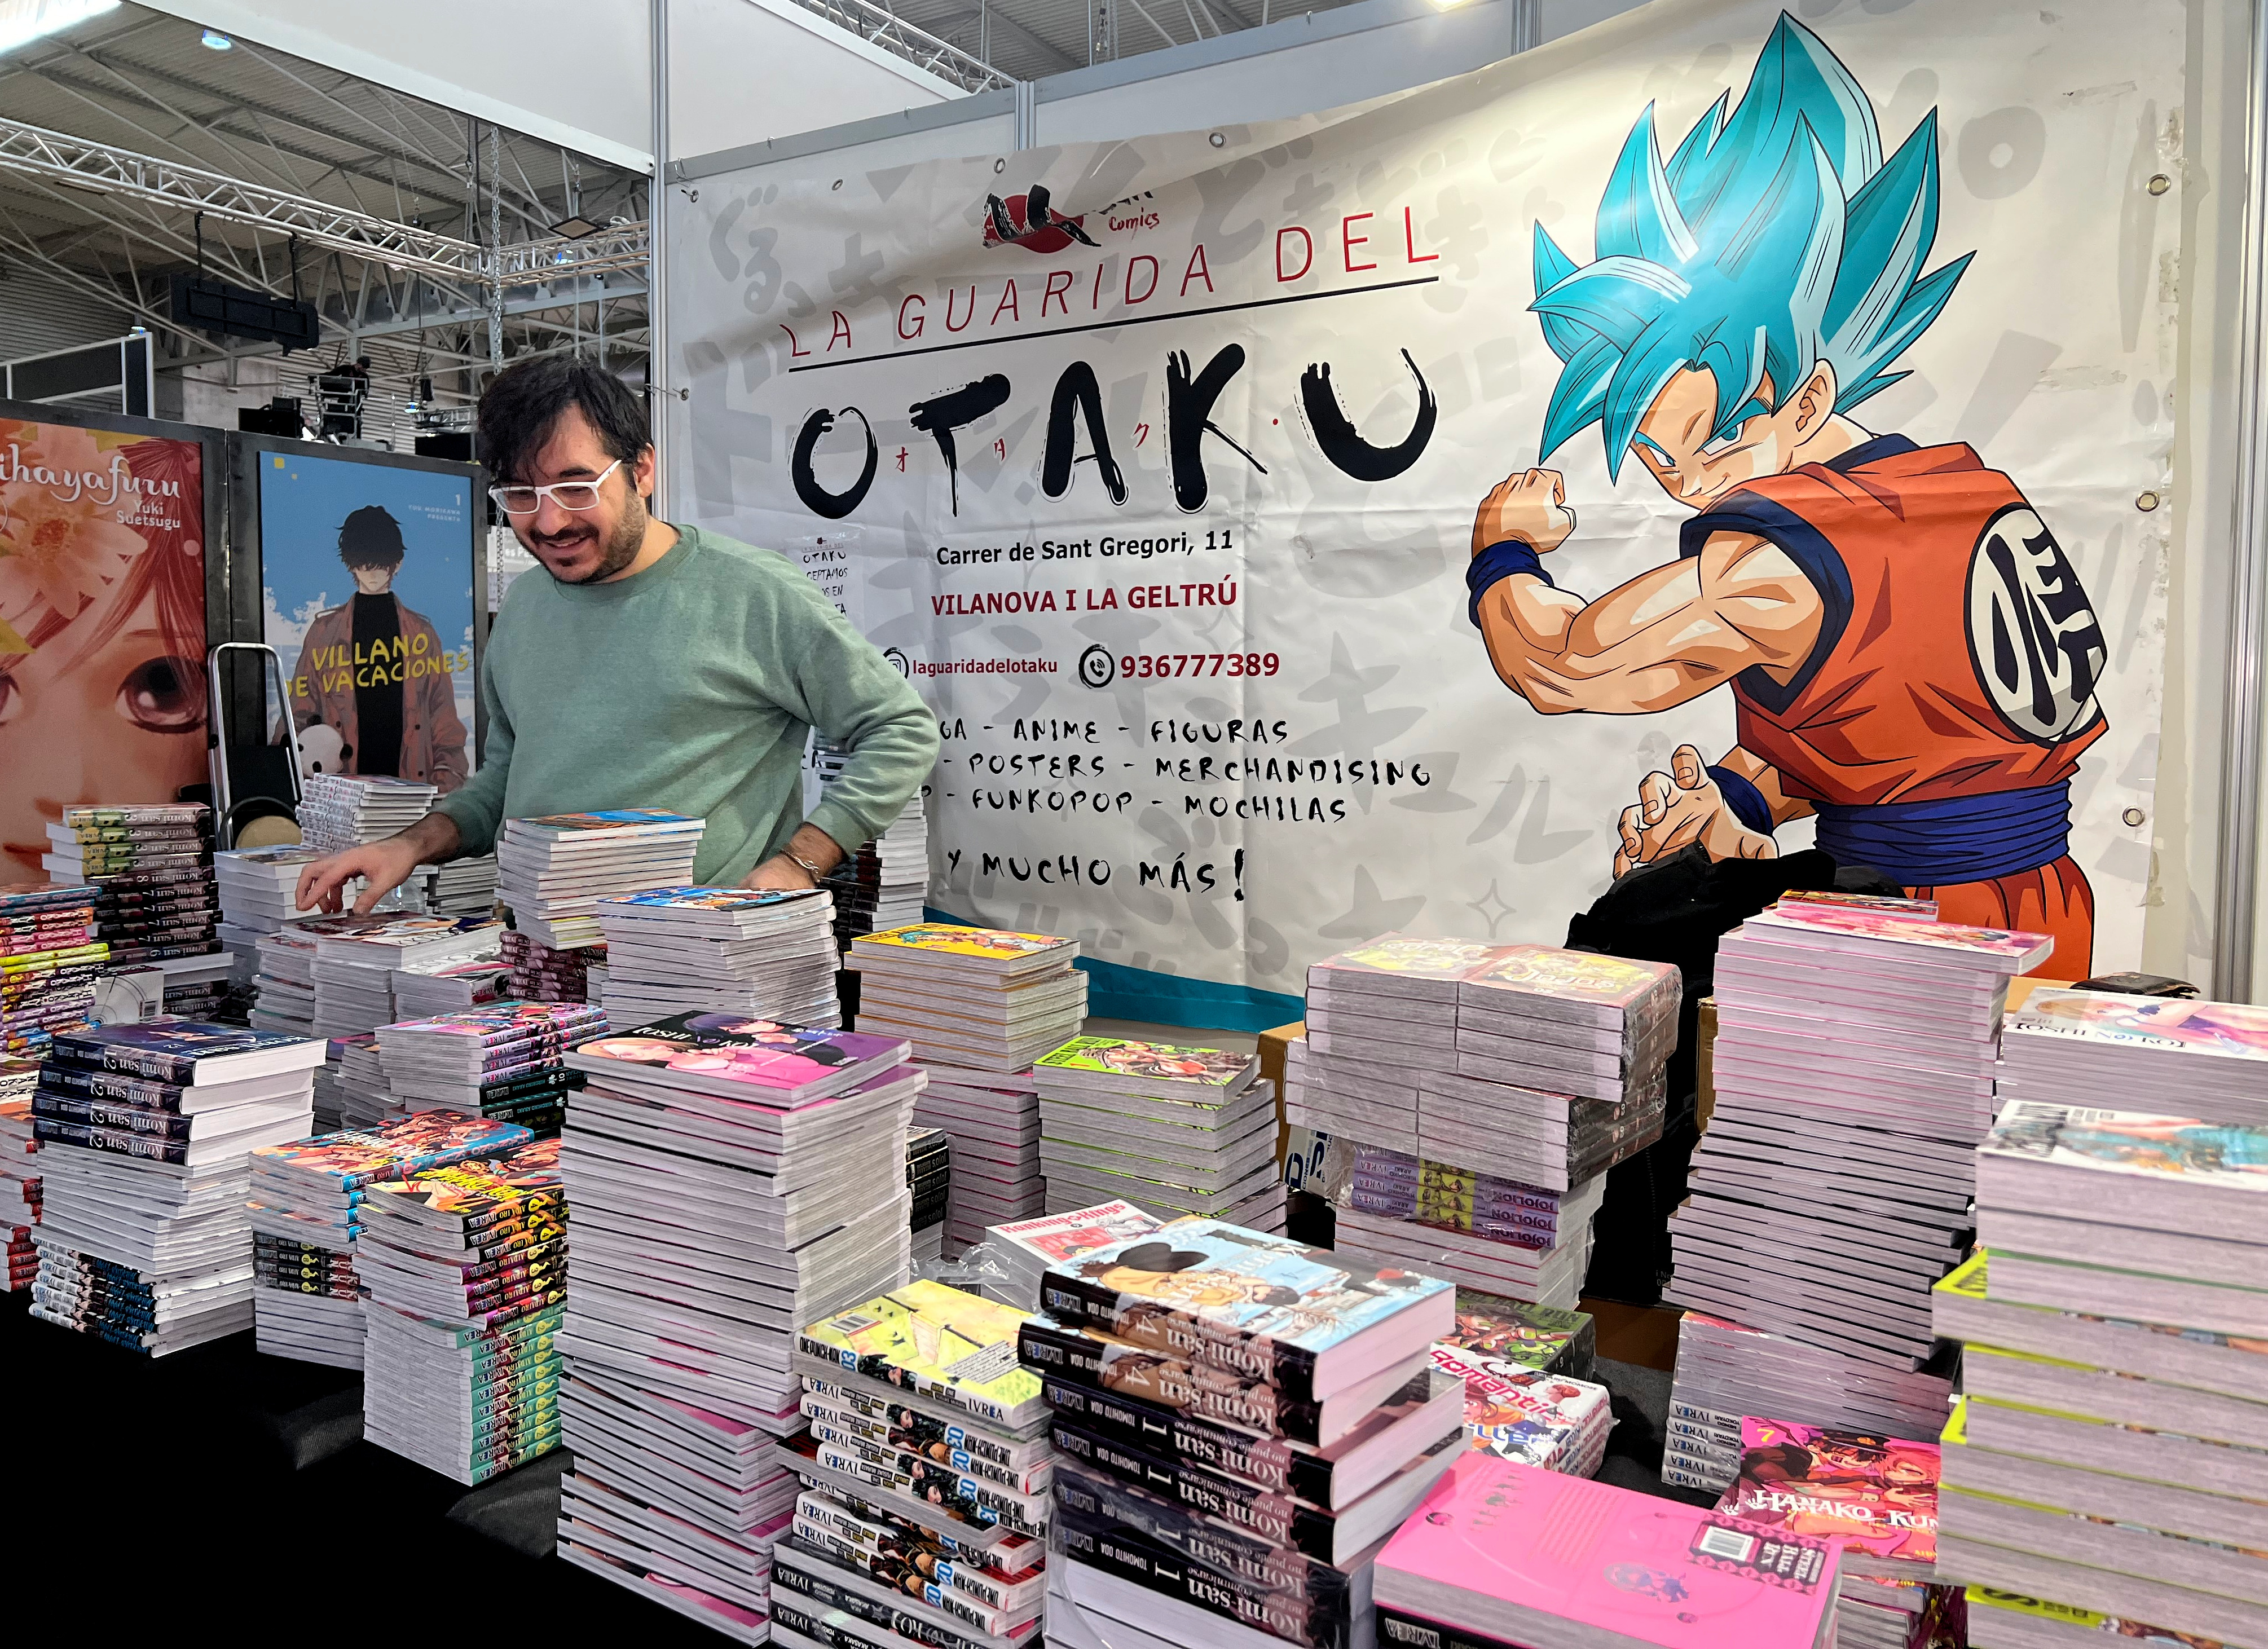 One of the stands exhibiting at the 29th Manga Barcelona